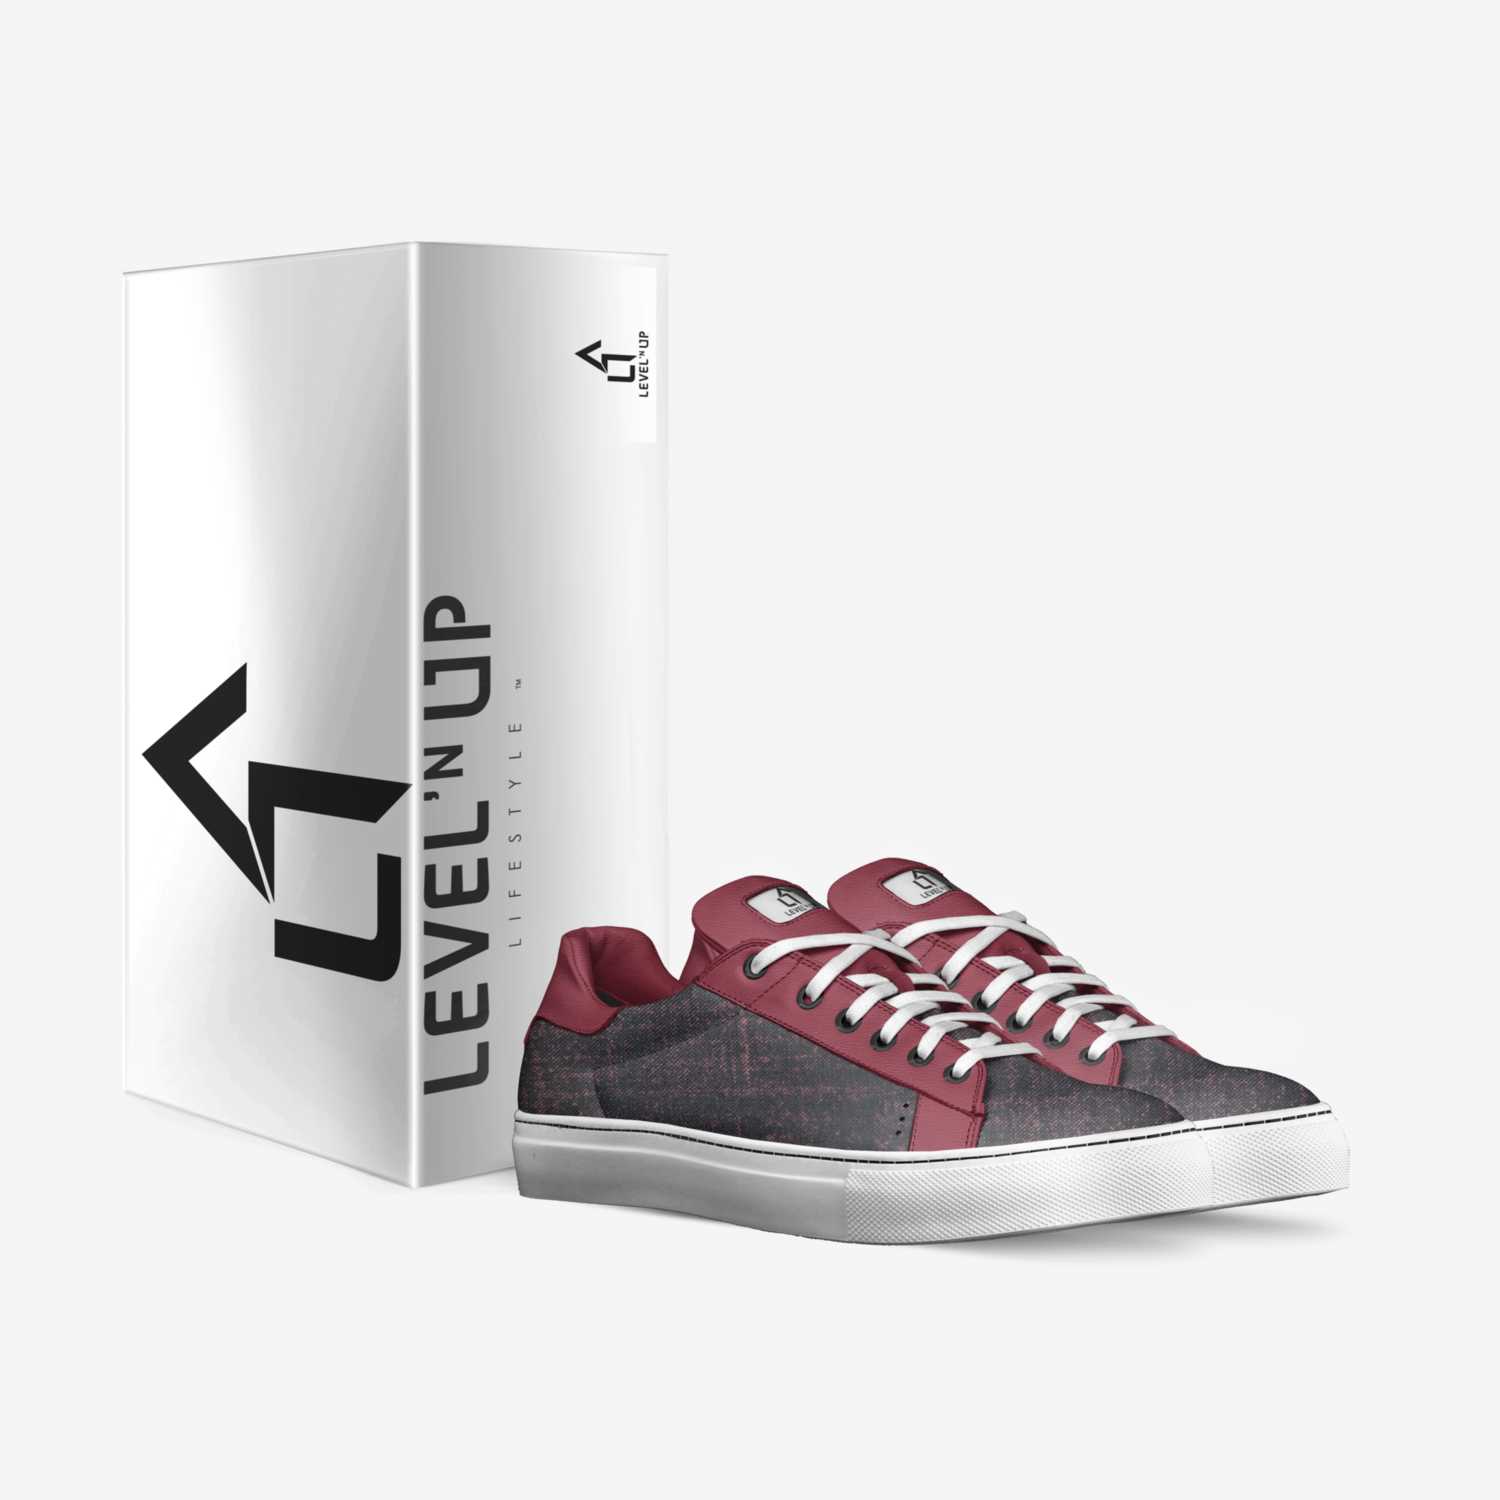 Level Up custom made in Italy shoes by Jeff Similien | Box view